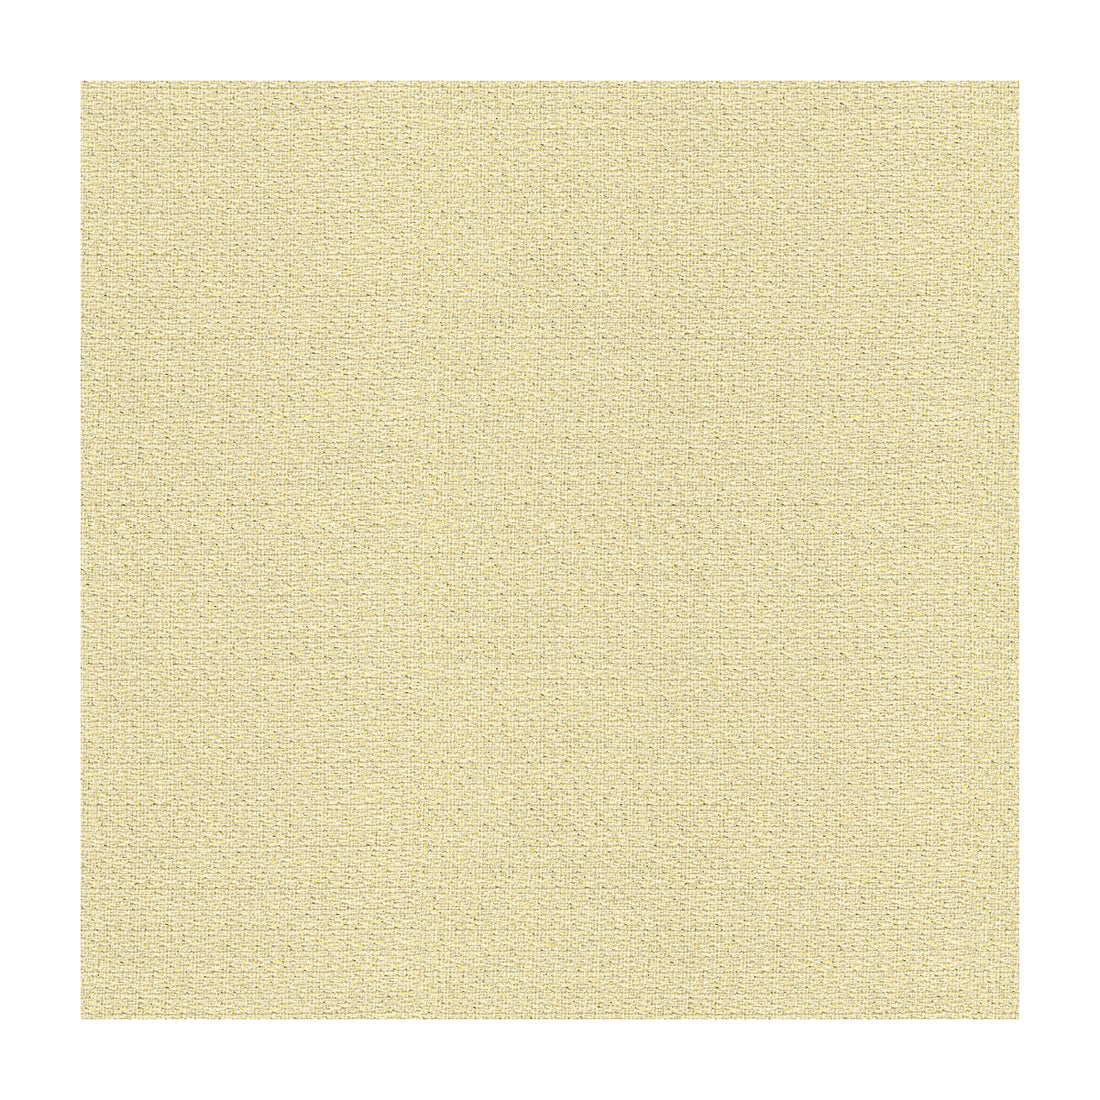 Gilded Wool fabric in sterling color - pattern 3956.101.0 - by Kravet Couture in the Modern Luxe collection